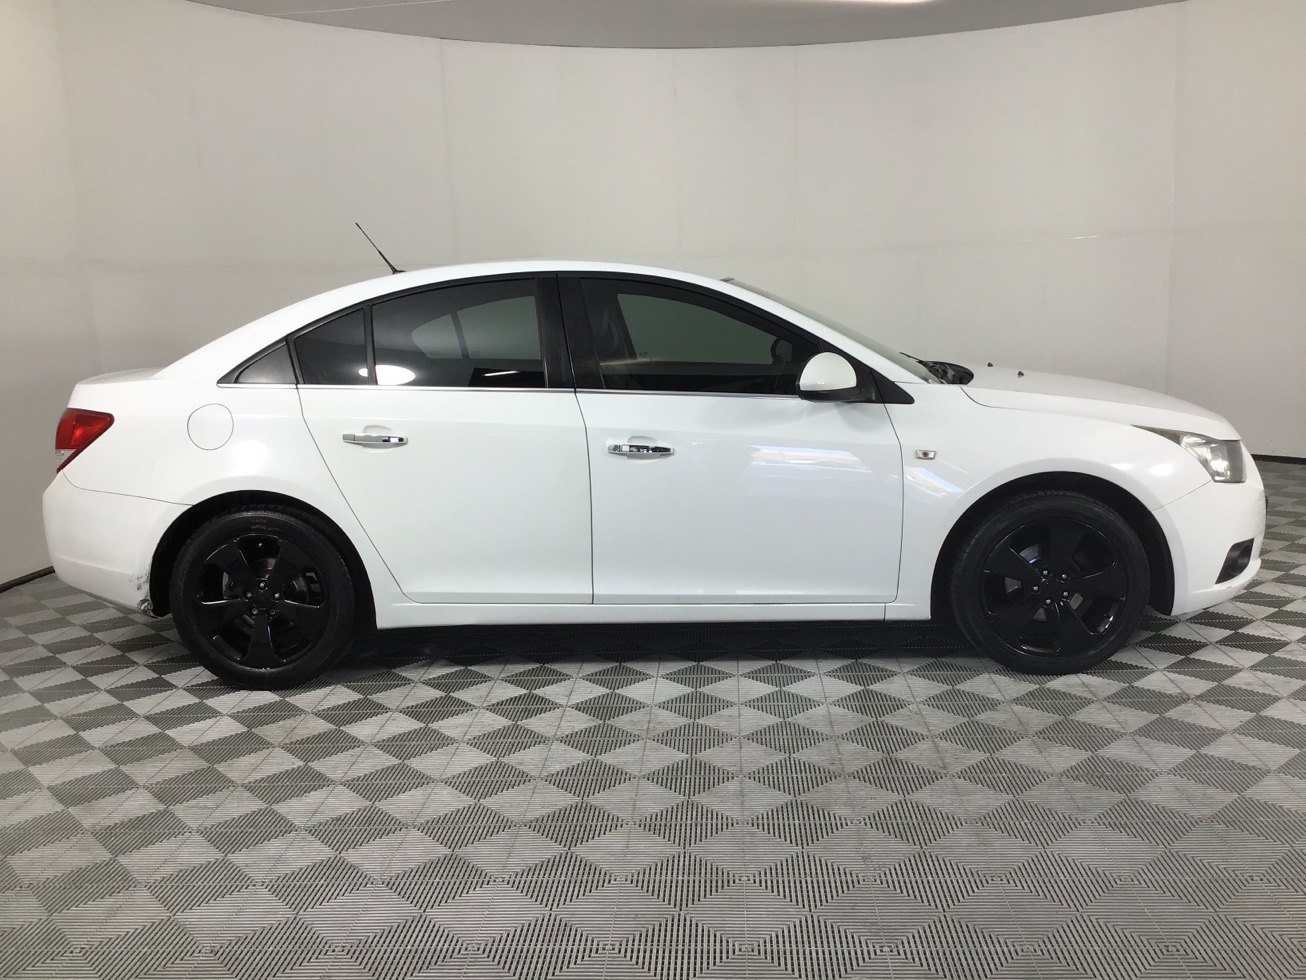 Used 2012 Chevrolet Cruze 1.8 LT Auto for sale WeBuyCars